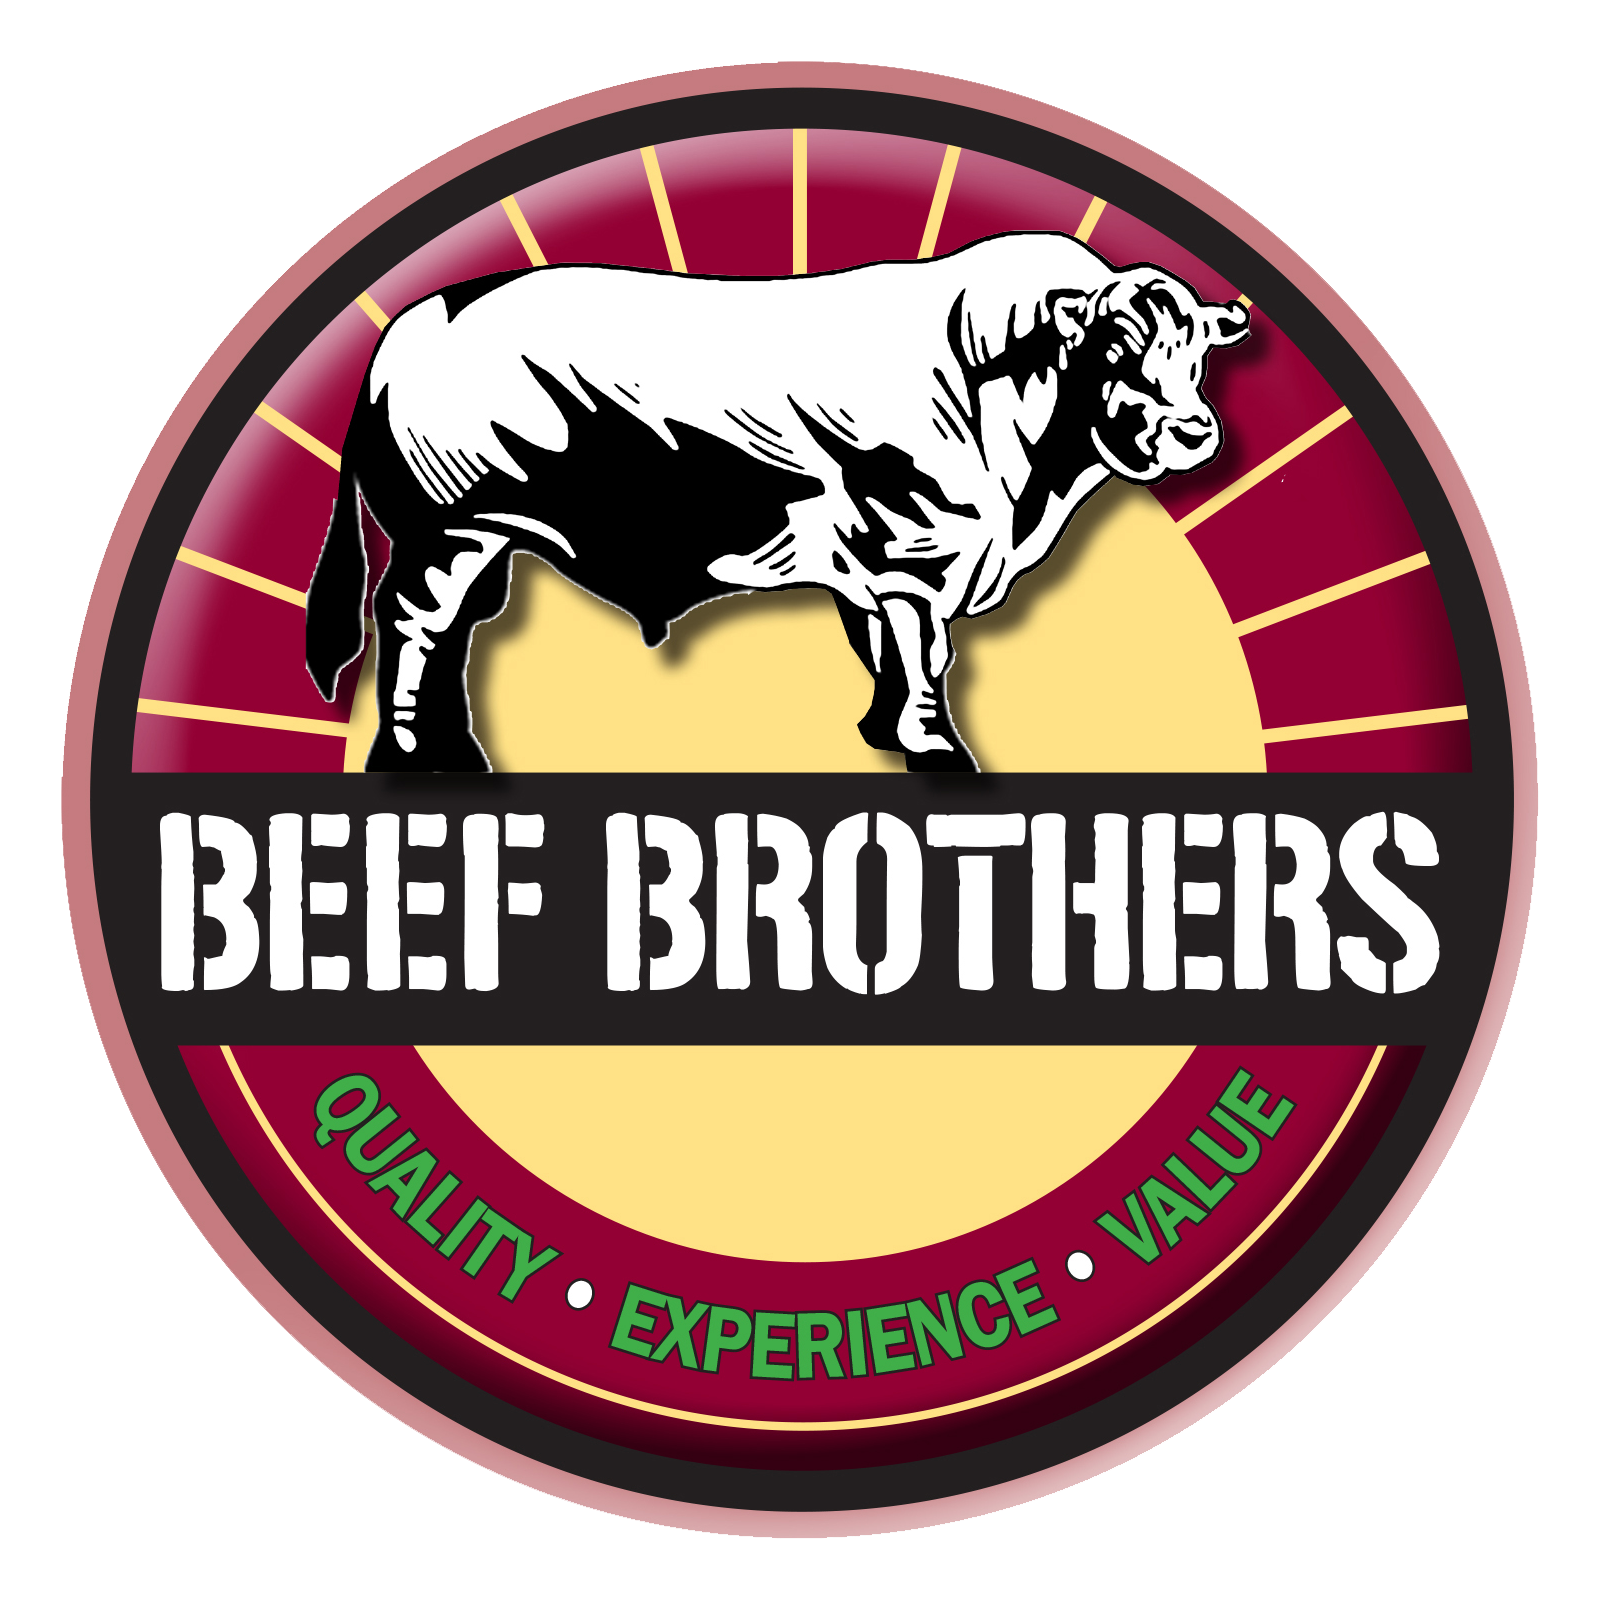 <p>The convenience of ordering online is what brought me to the Beef Brothers website, and the family is all very happy with the standard of products we receive.</p>